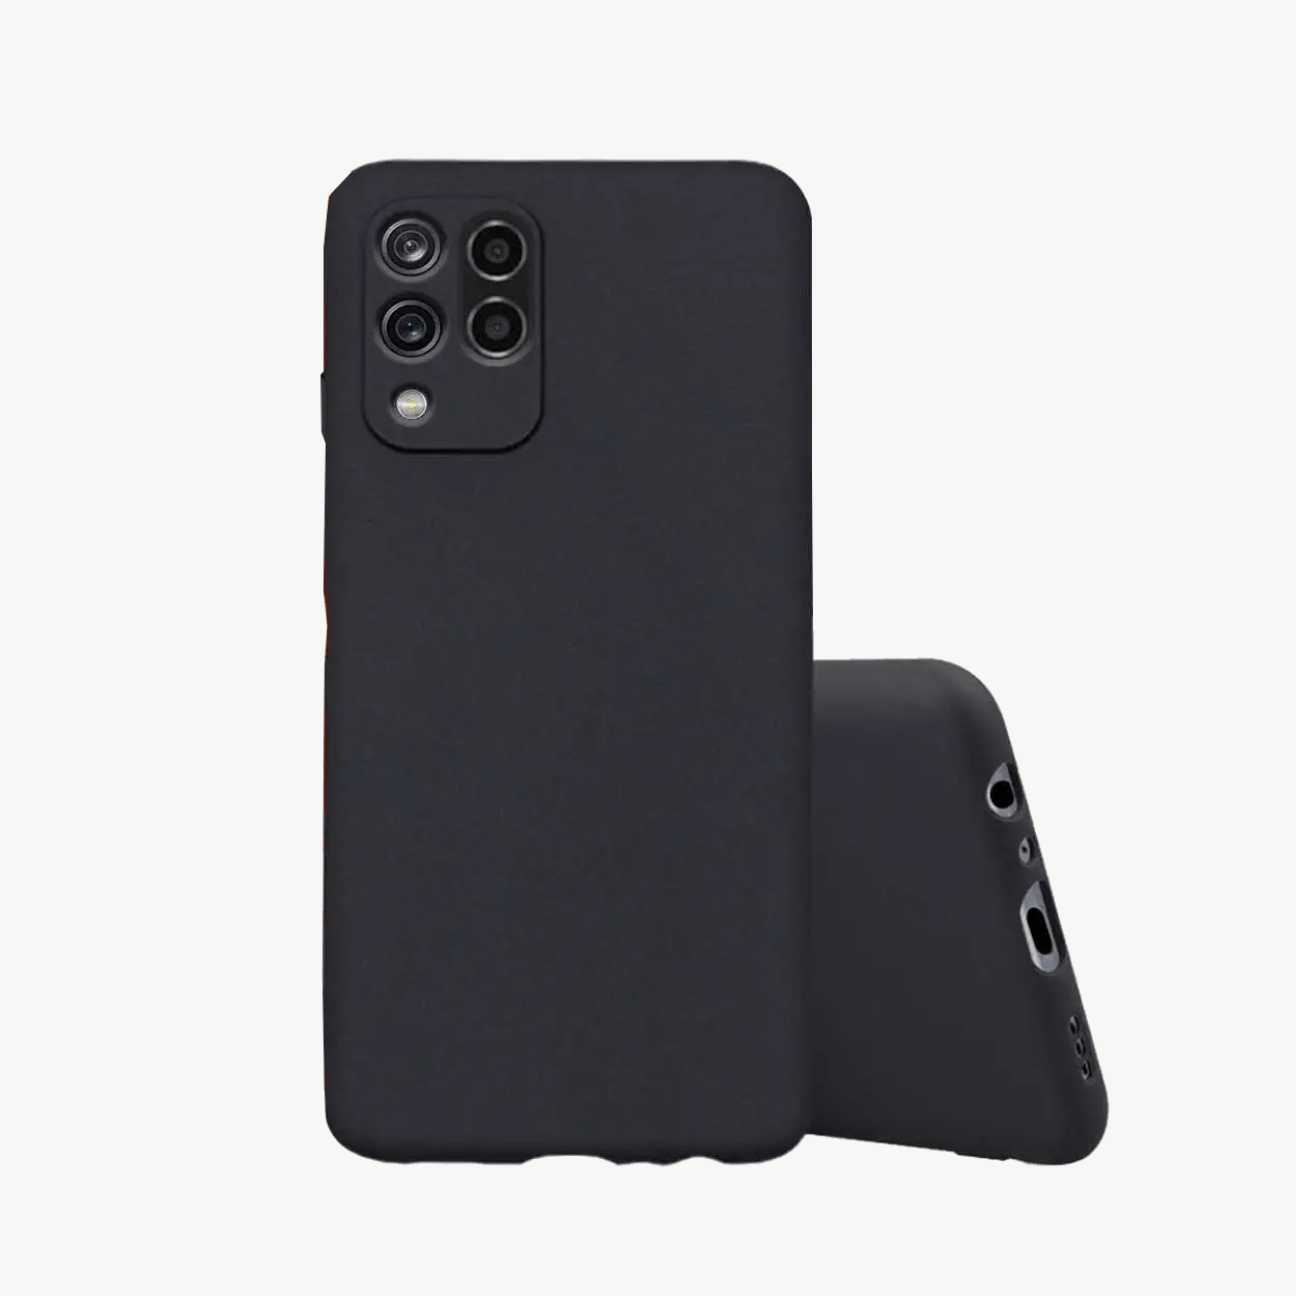 Oppo A33 (2020) Black Soft Silicone Phone Case Image